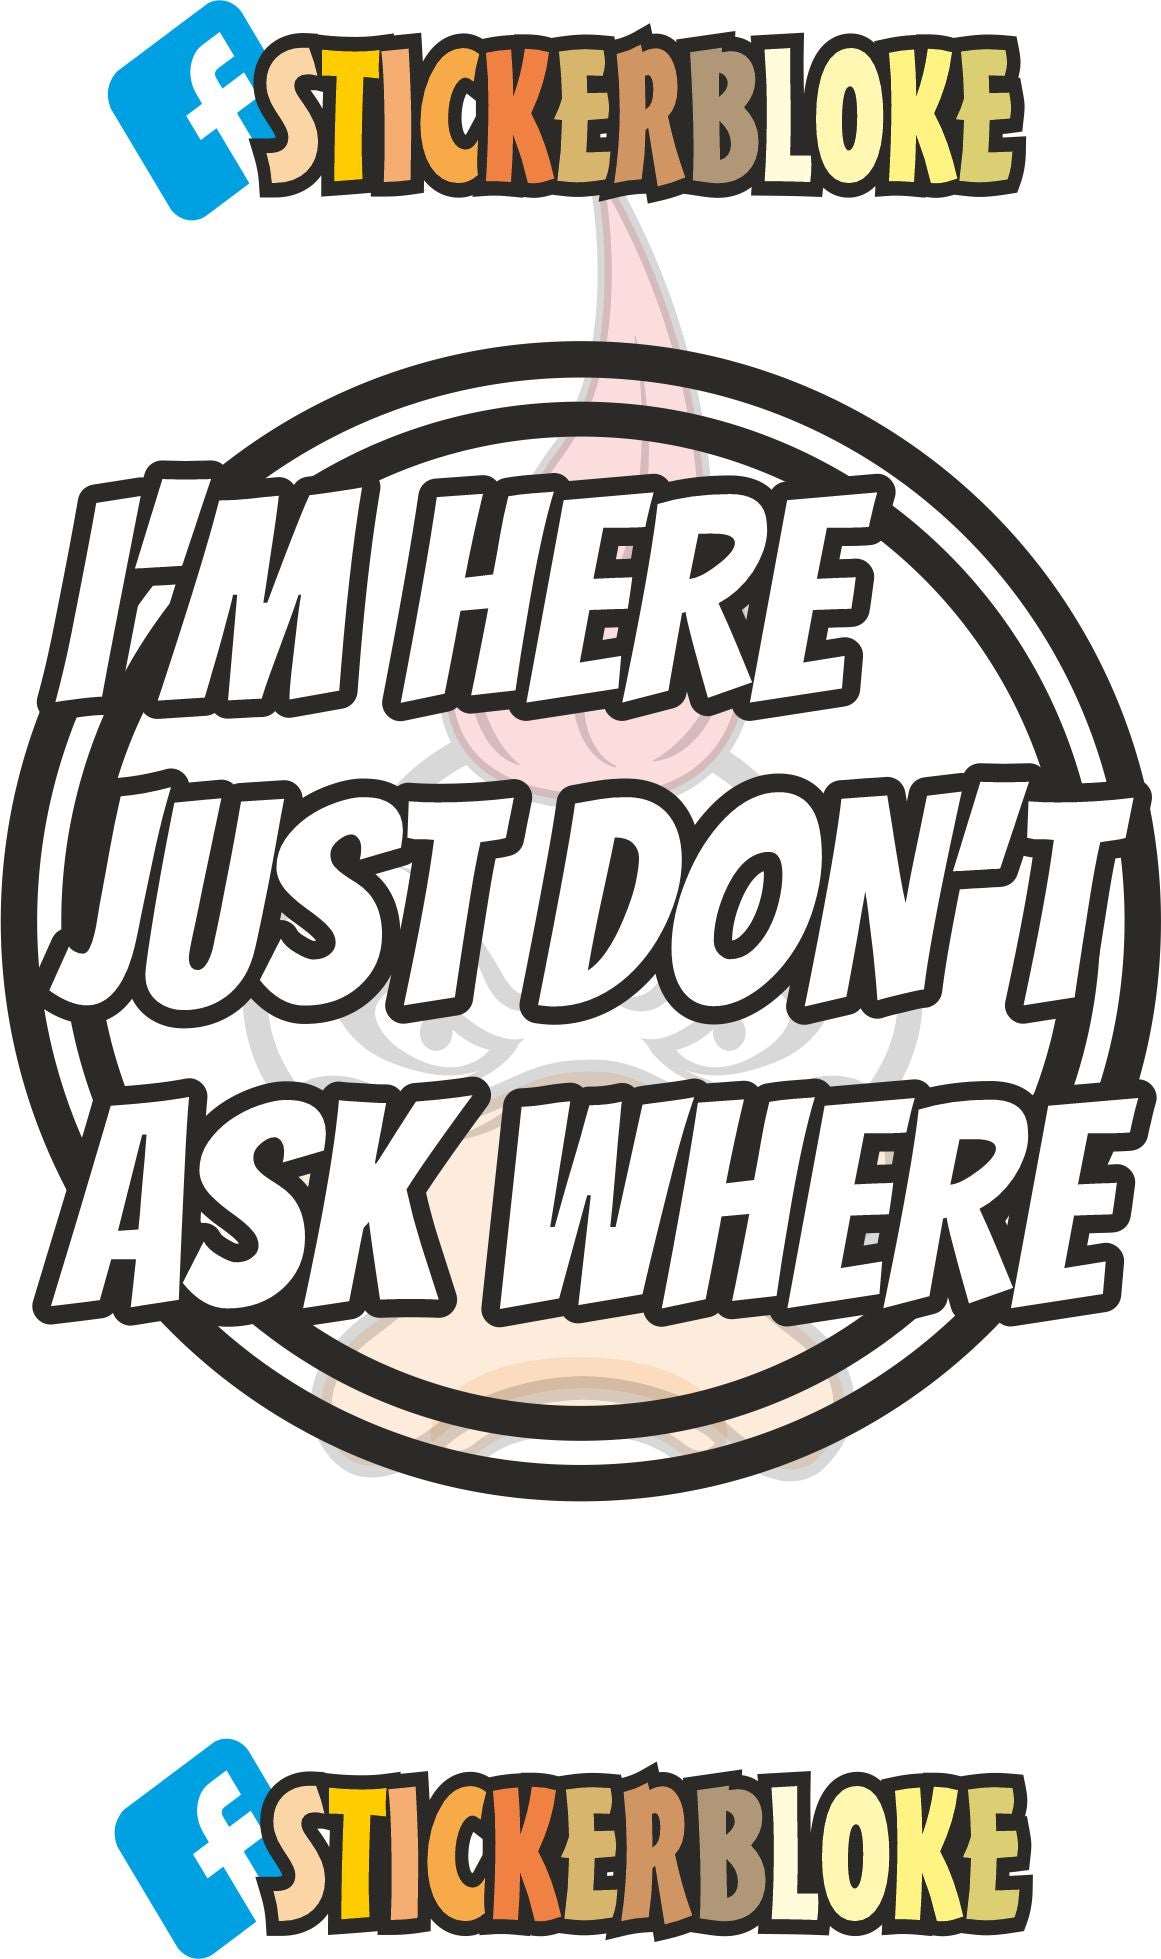 IM HERE JUST DONT ASK WHERE STICKER